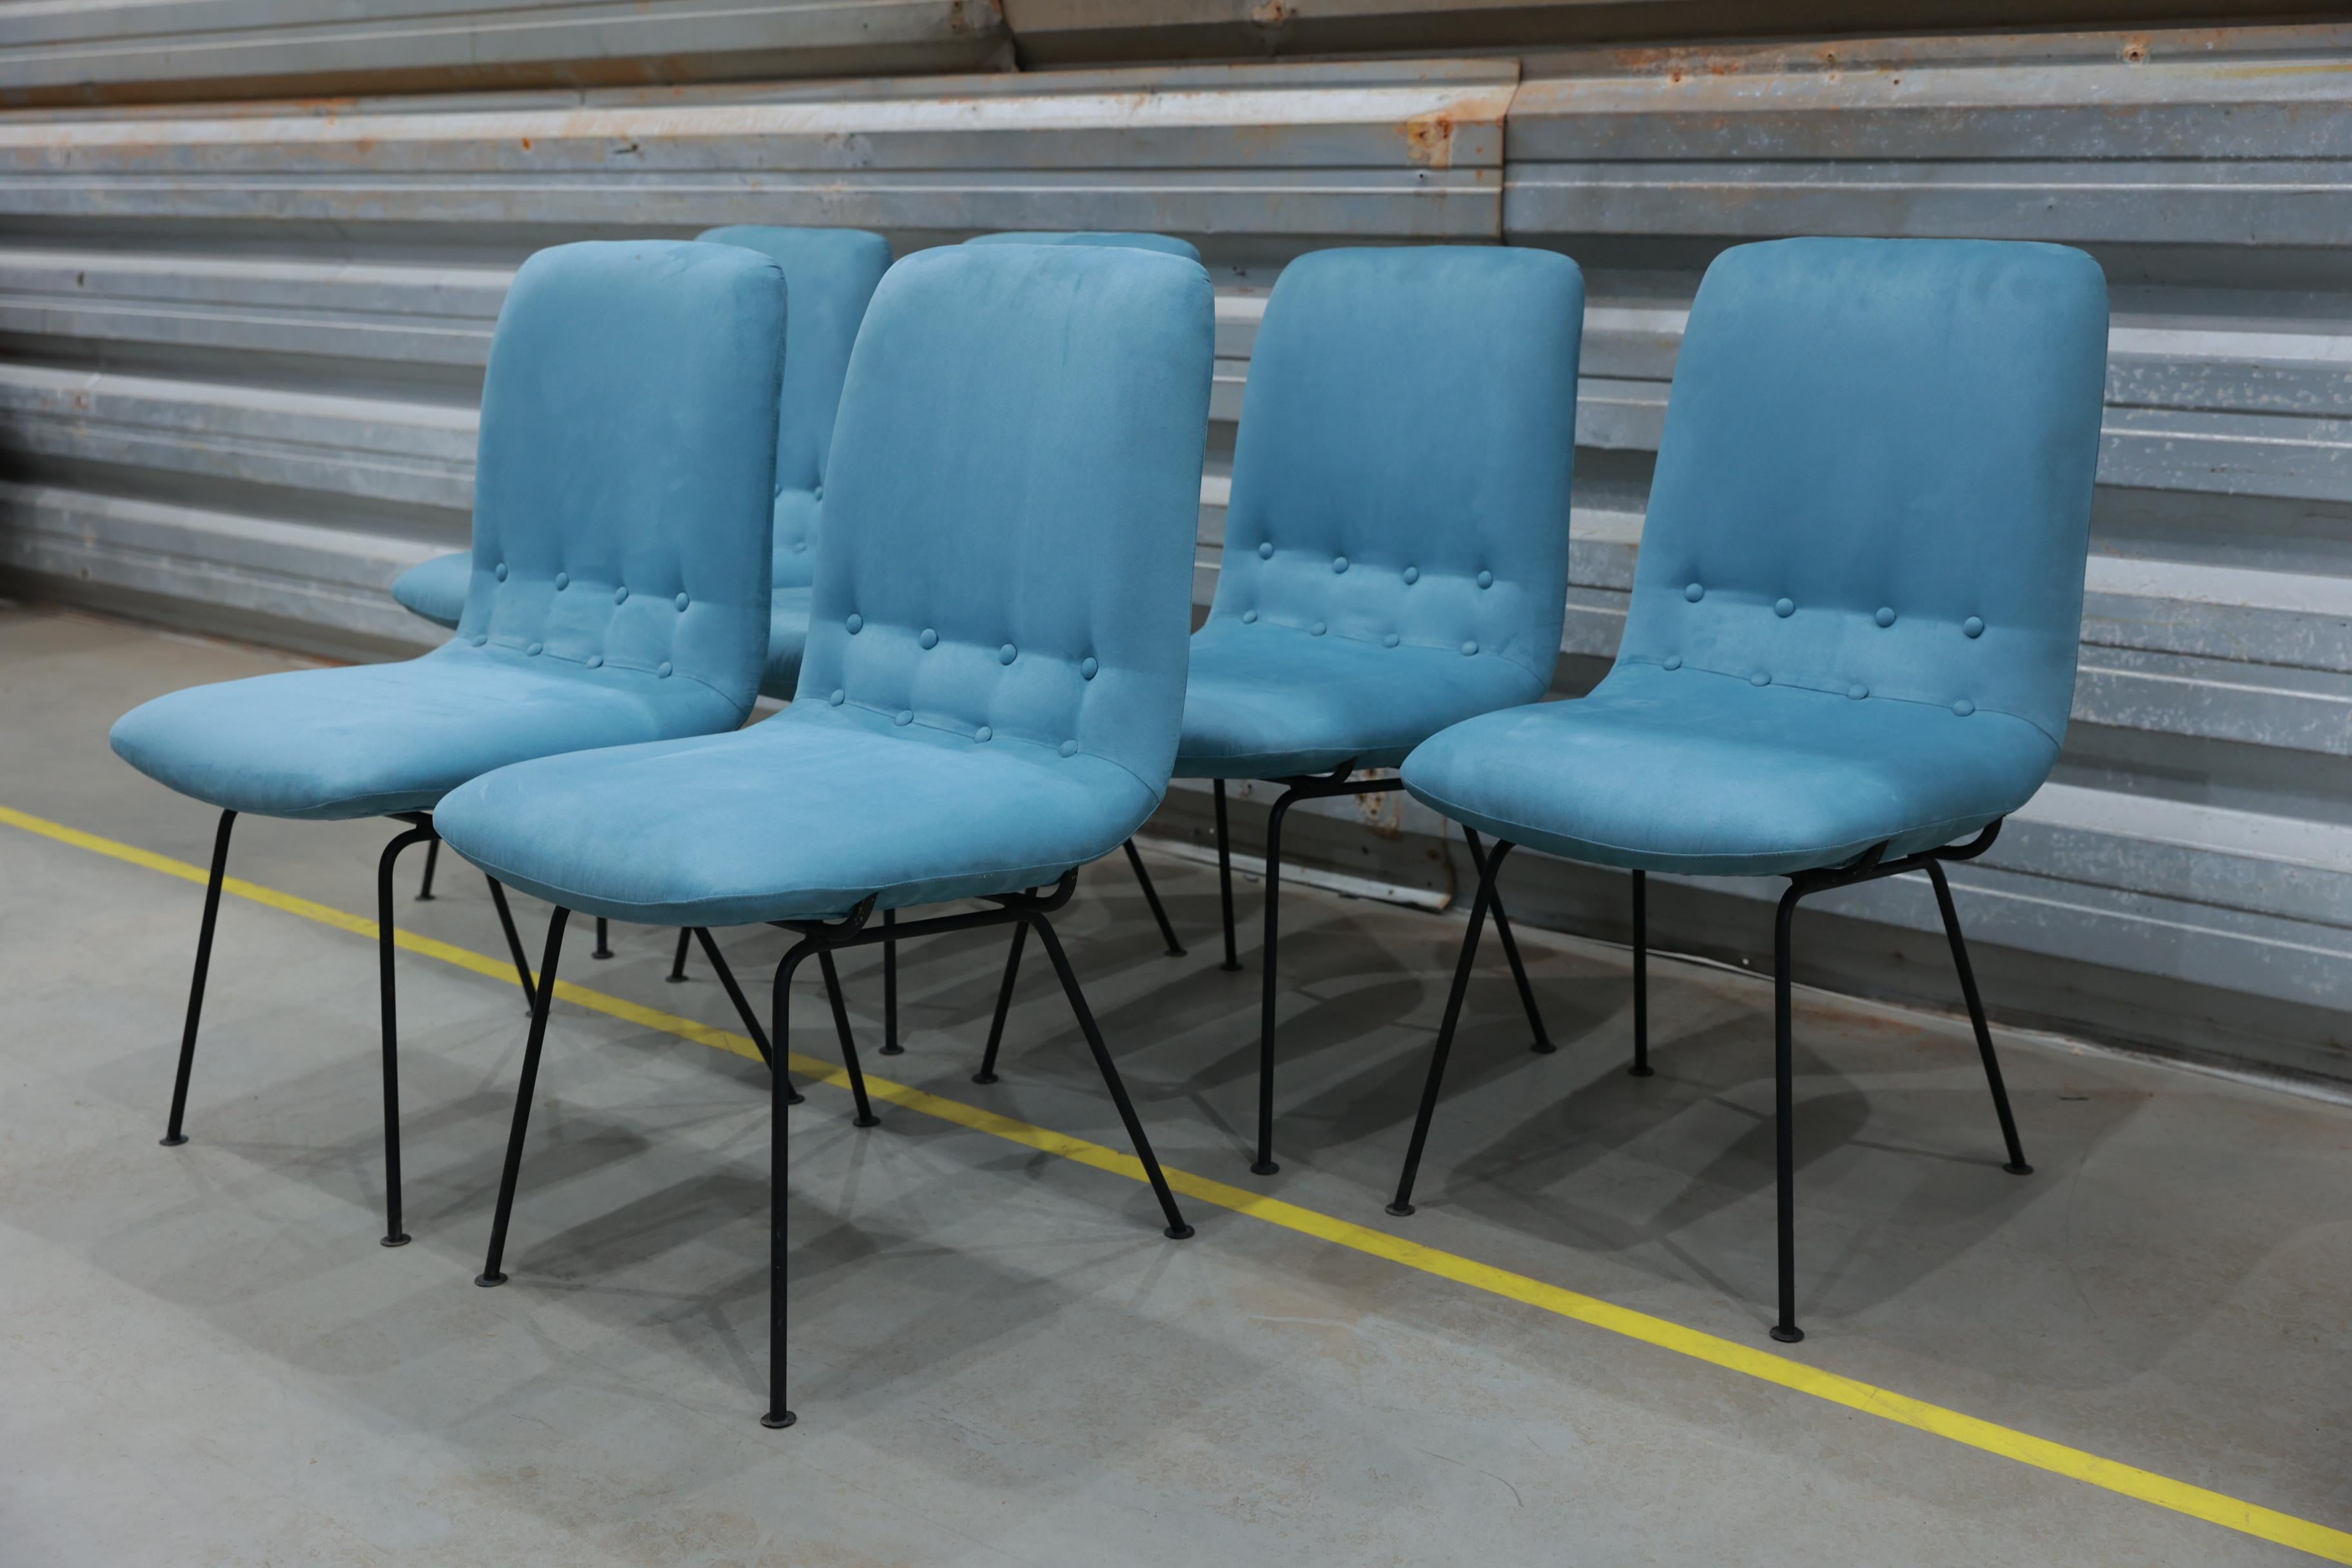 Mid-Century Modern Brazilian Modern Chairs in Metal and Fabric by Carlo Hauner, 1950s, Brazil For Sale